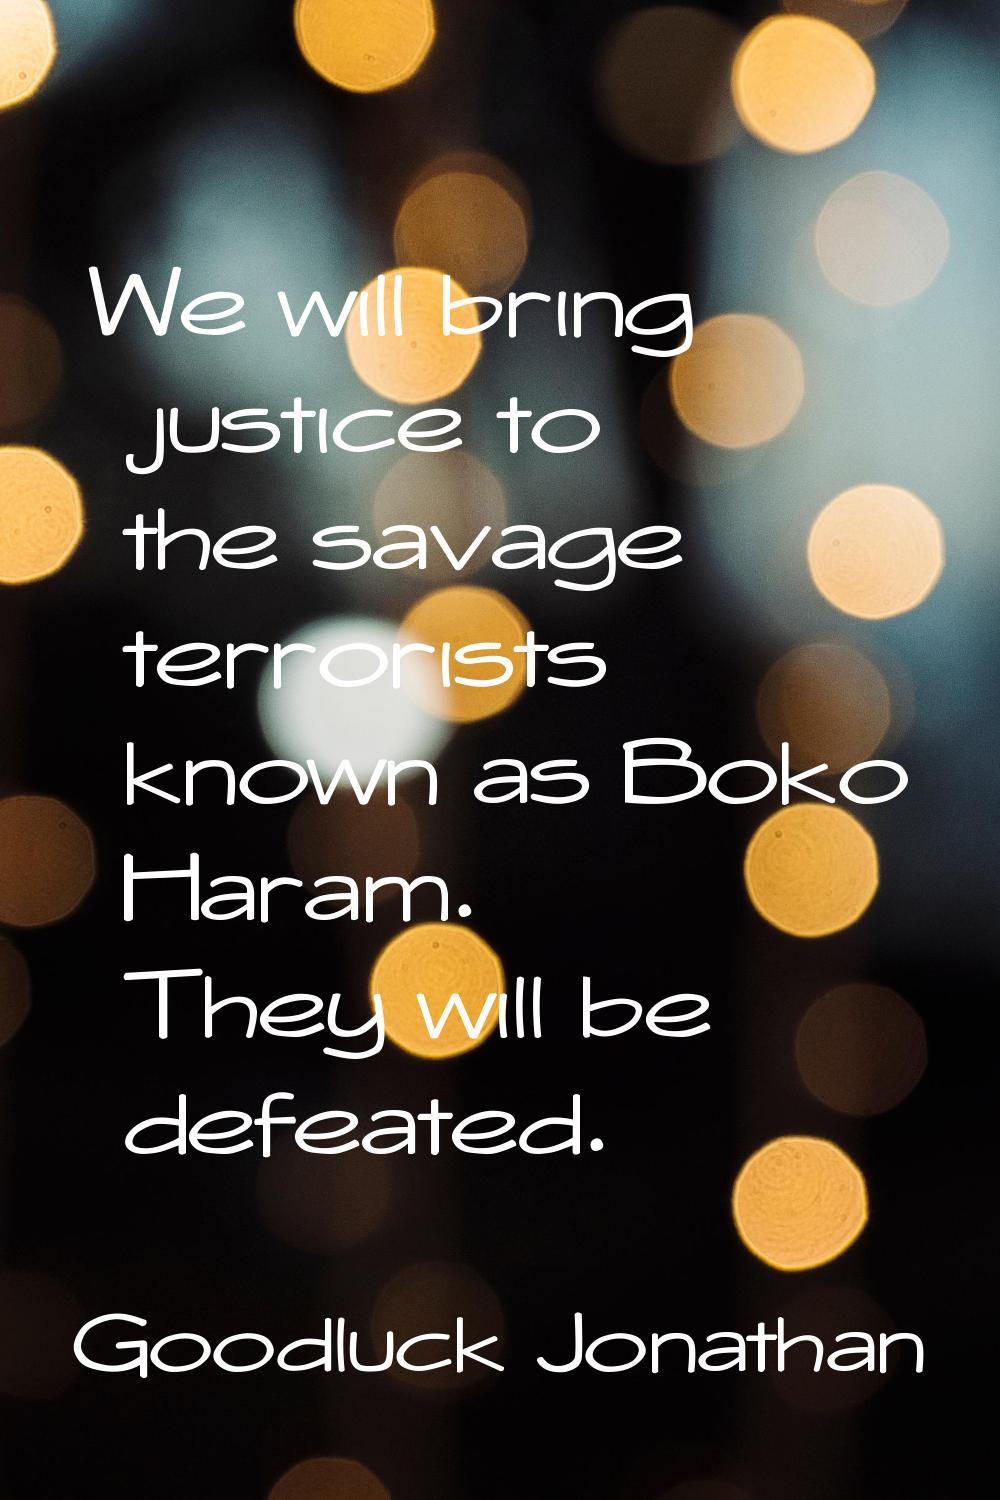 We will bring justice to the savage terrorists known as Boko Haram. They will be defeated.